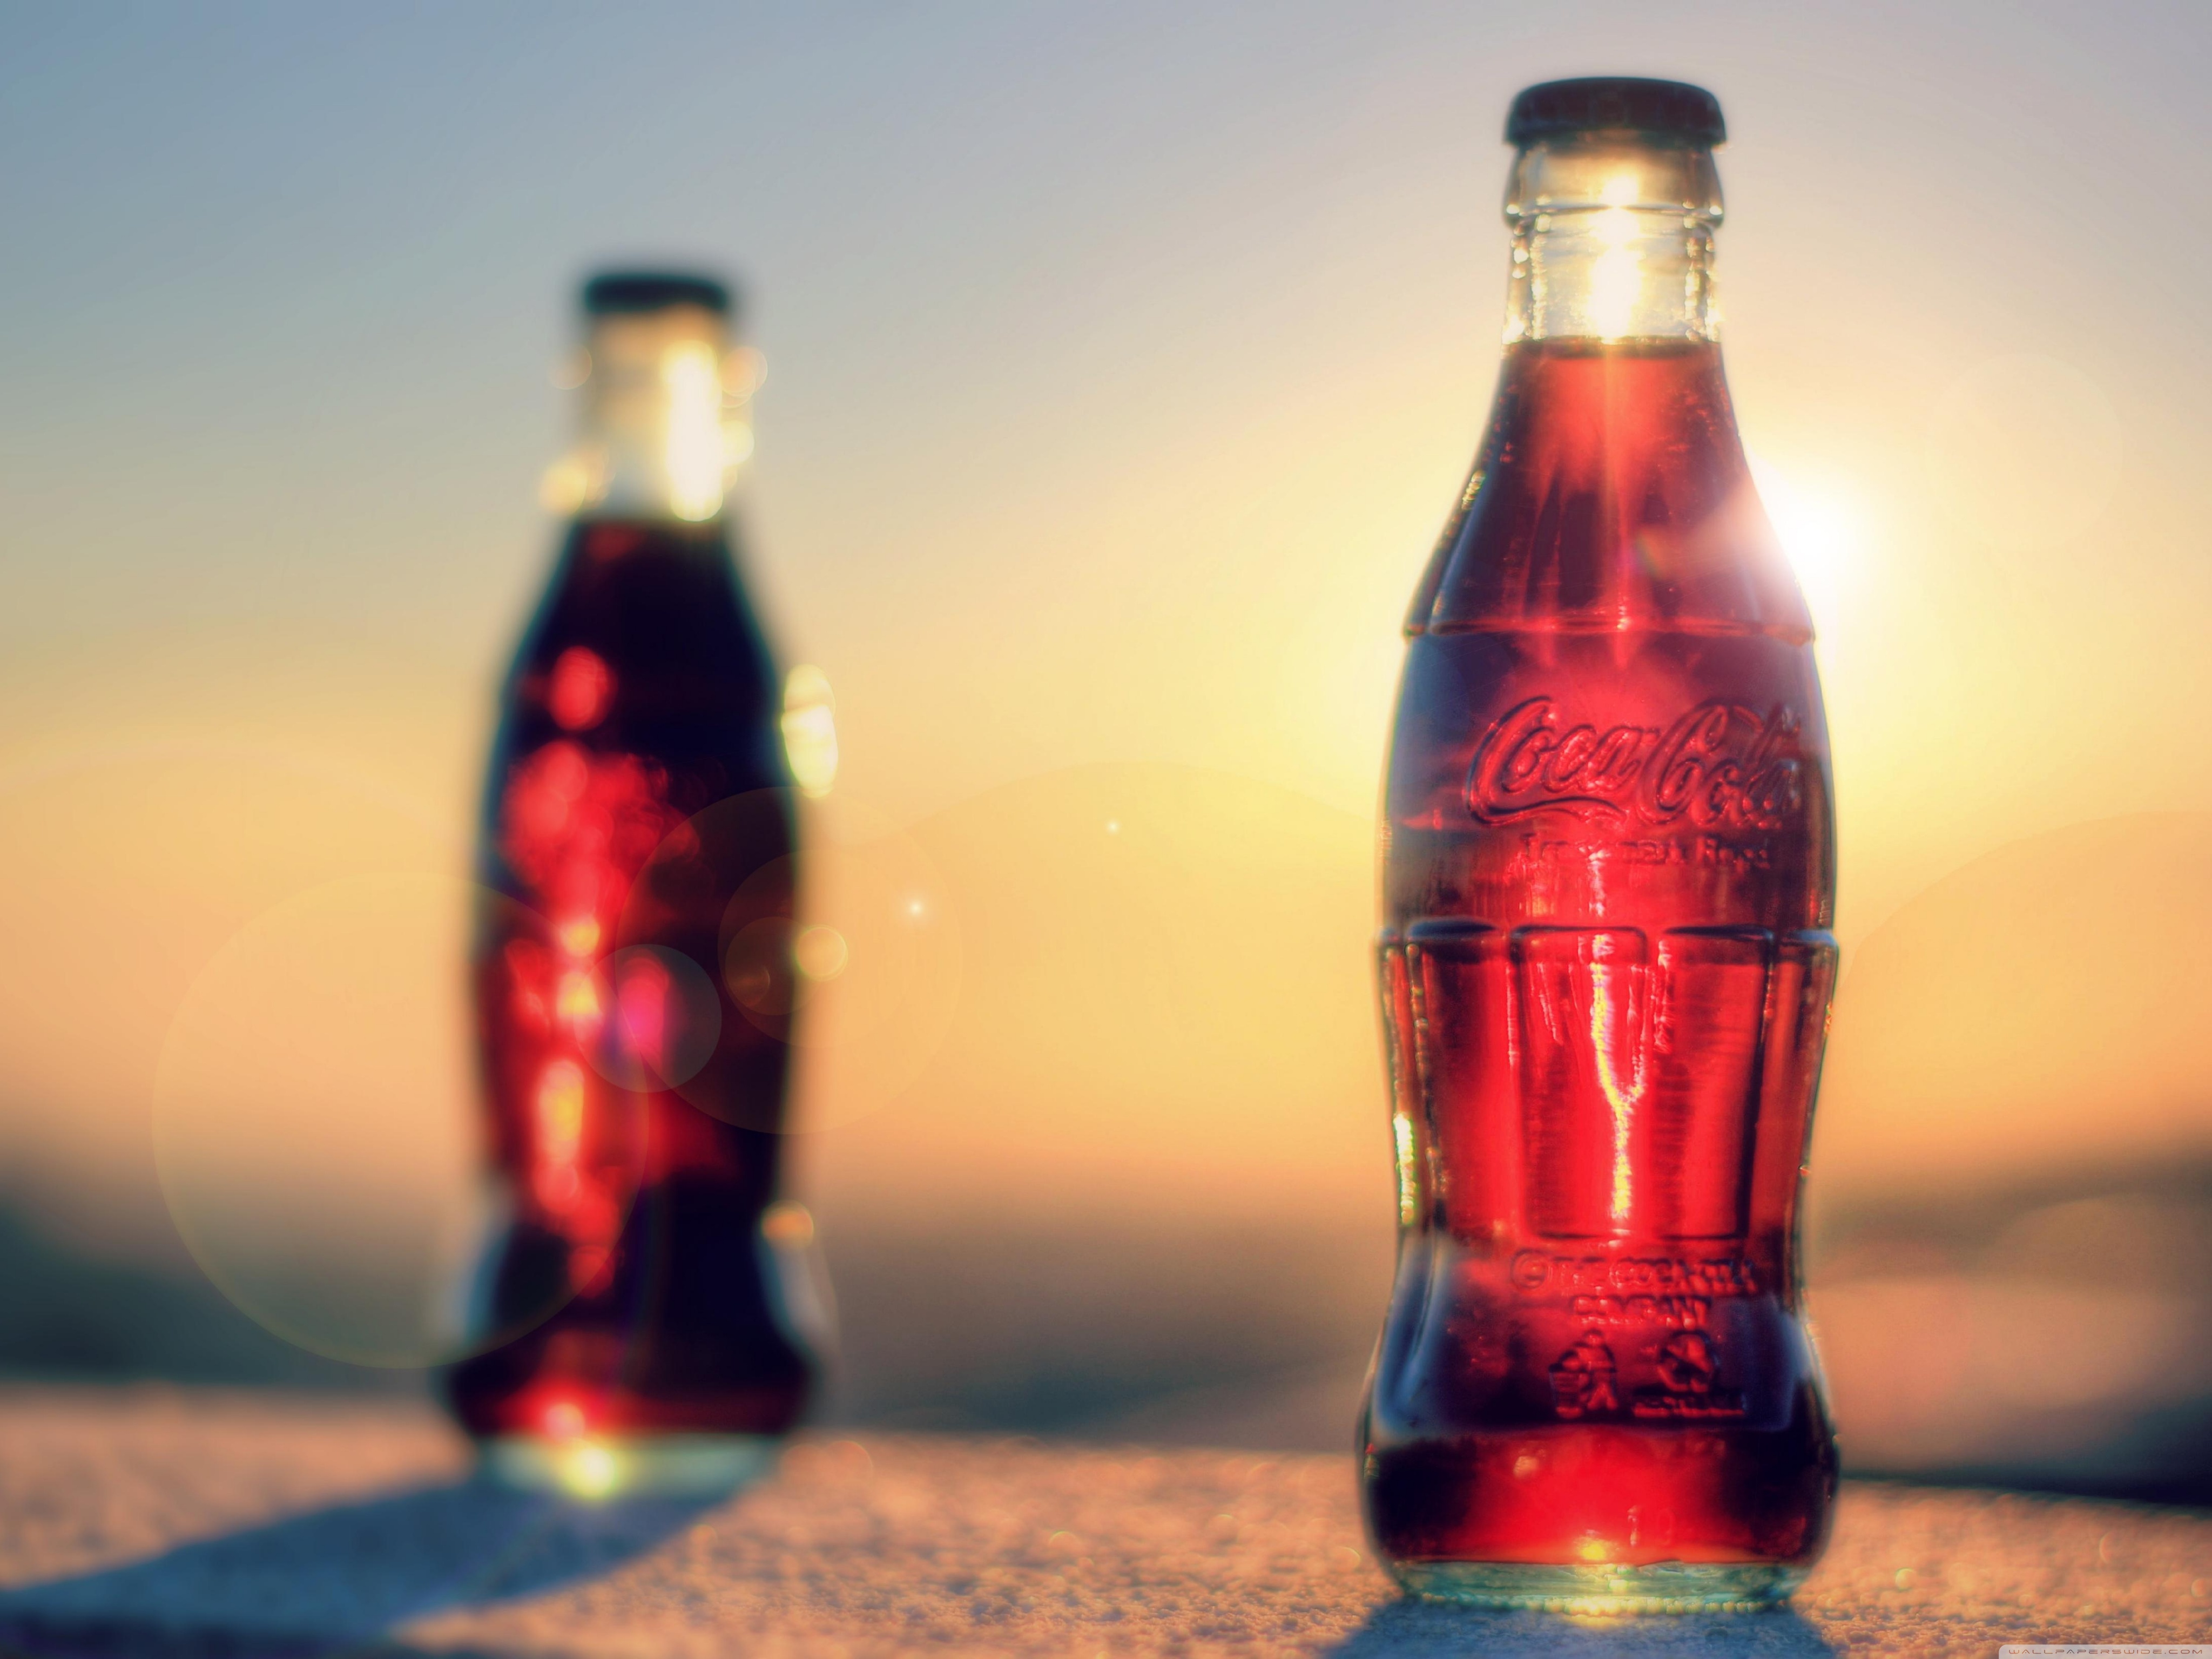 Coca Cola Wallpaper and Background Image